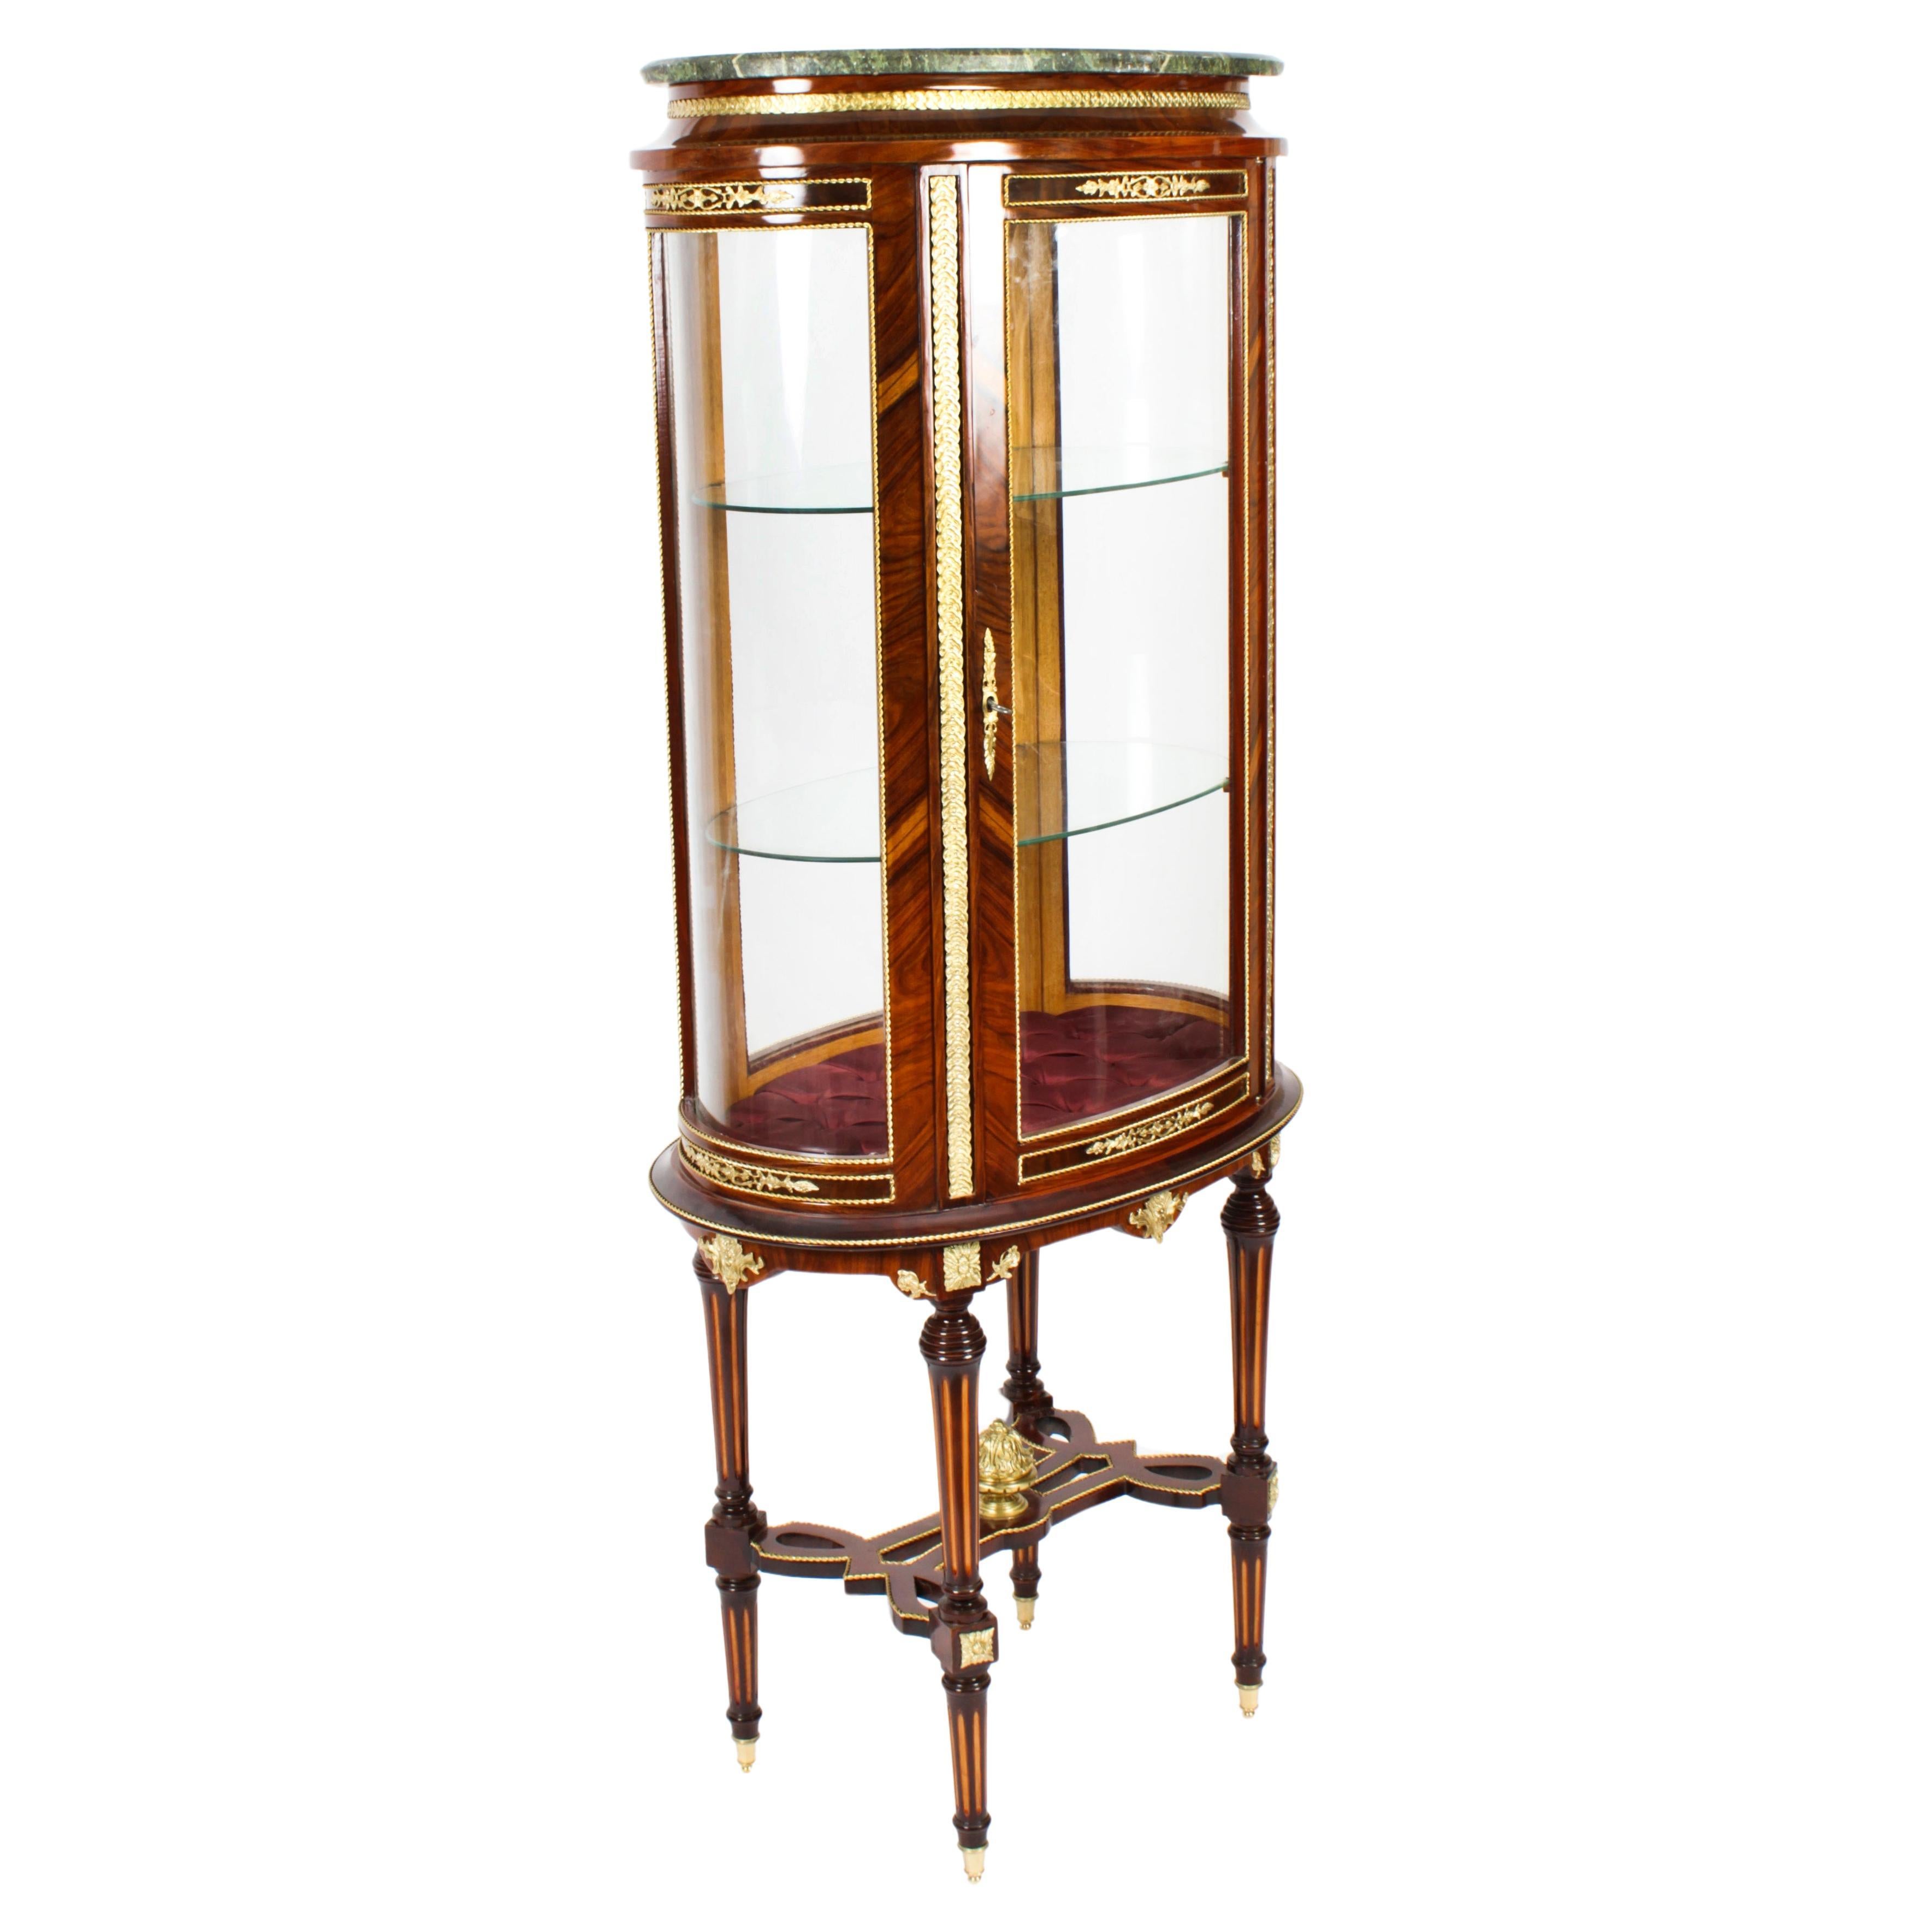 Vintage Oval Walnut & Ormolu Mounted Marble Topped Display Cabinet 20th Century For Sale